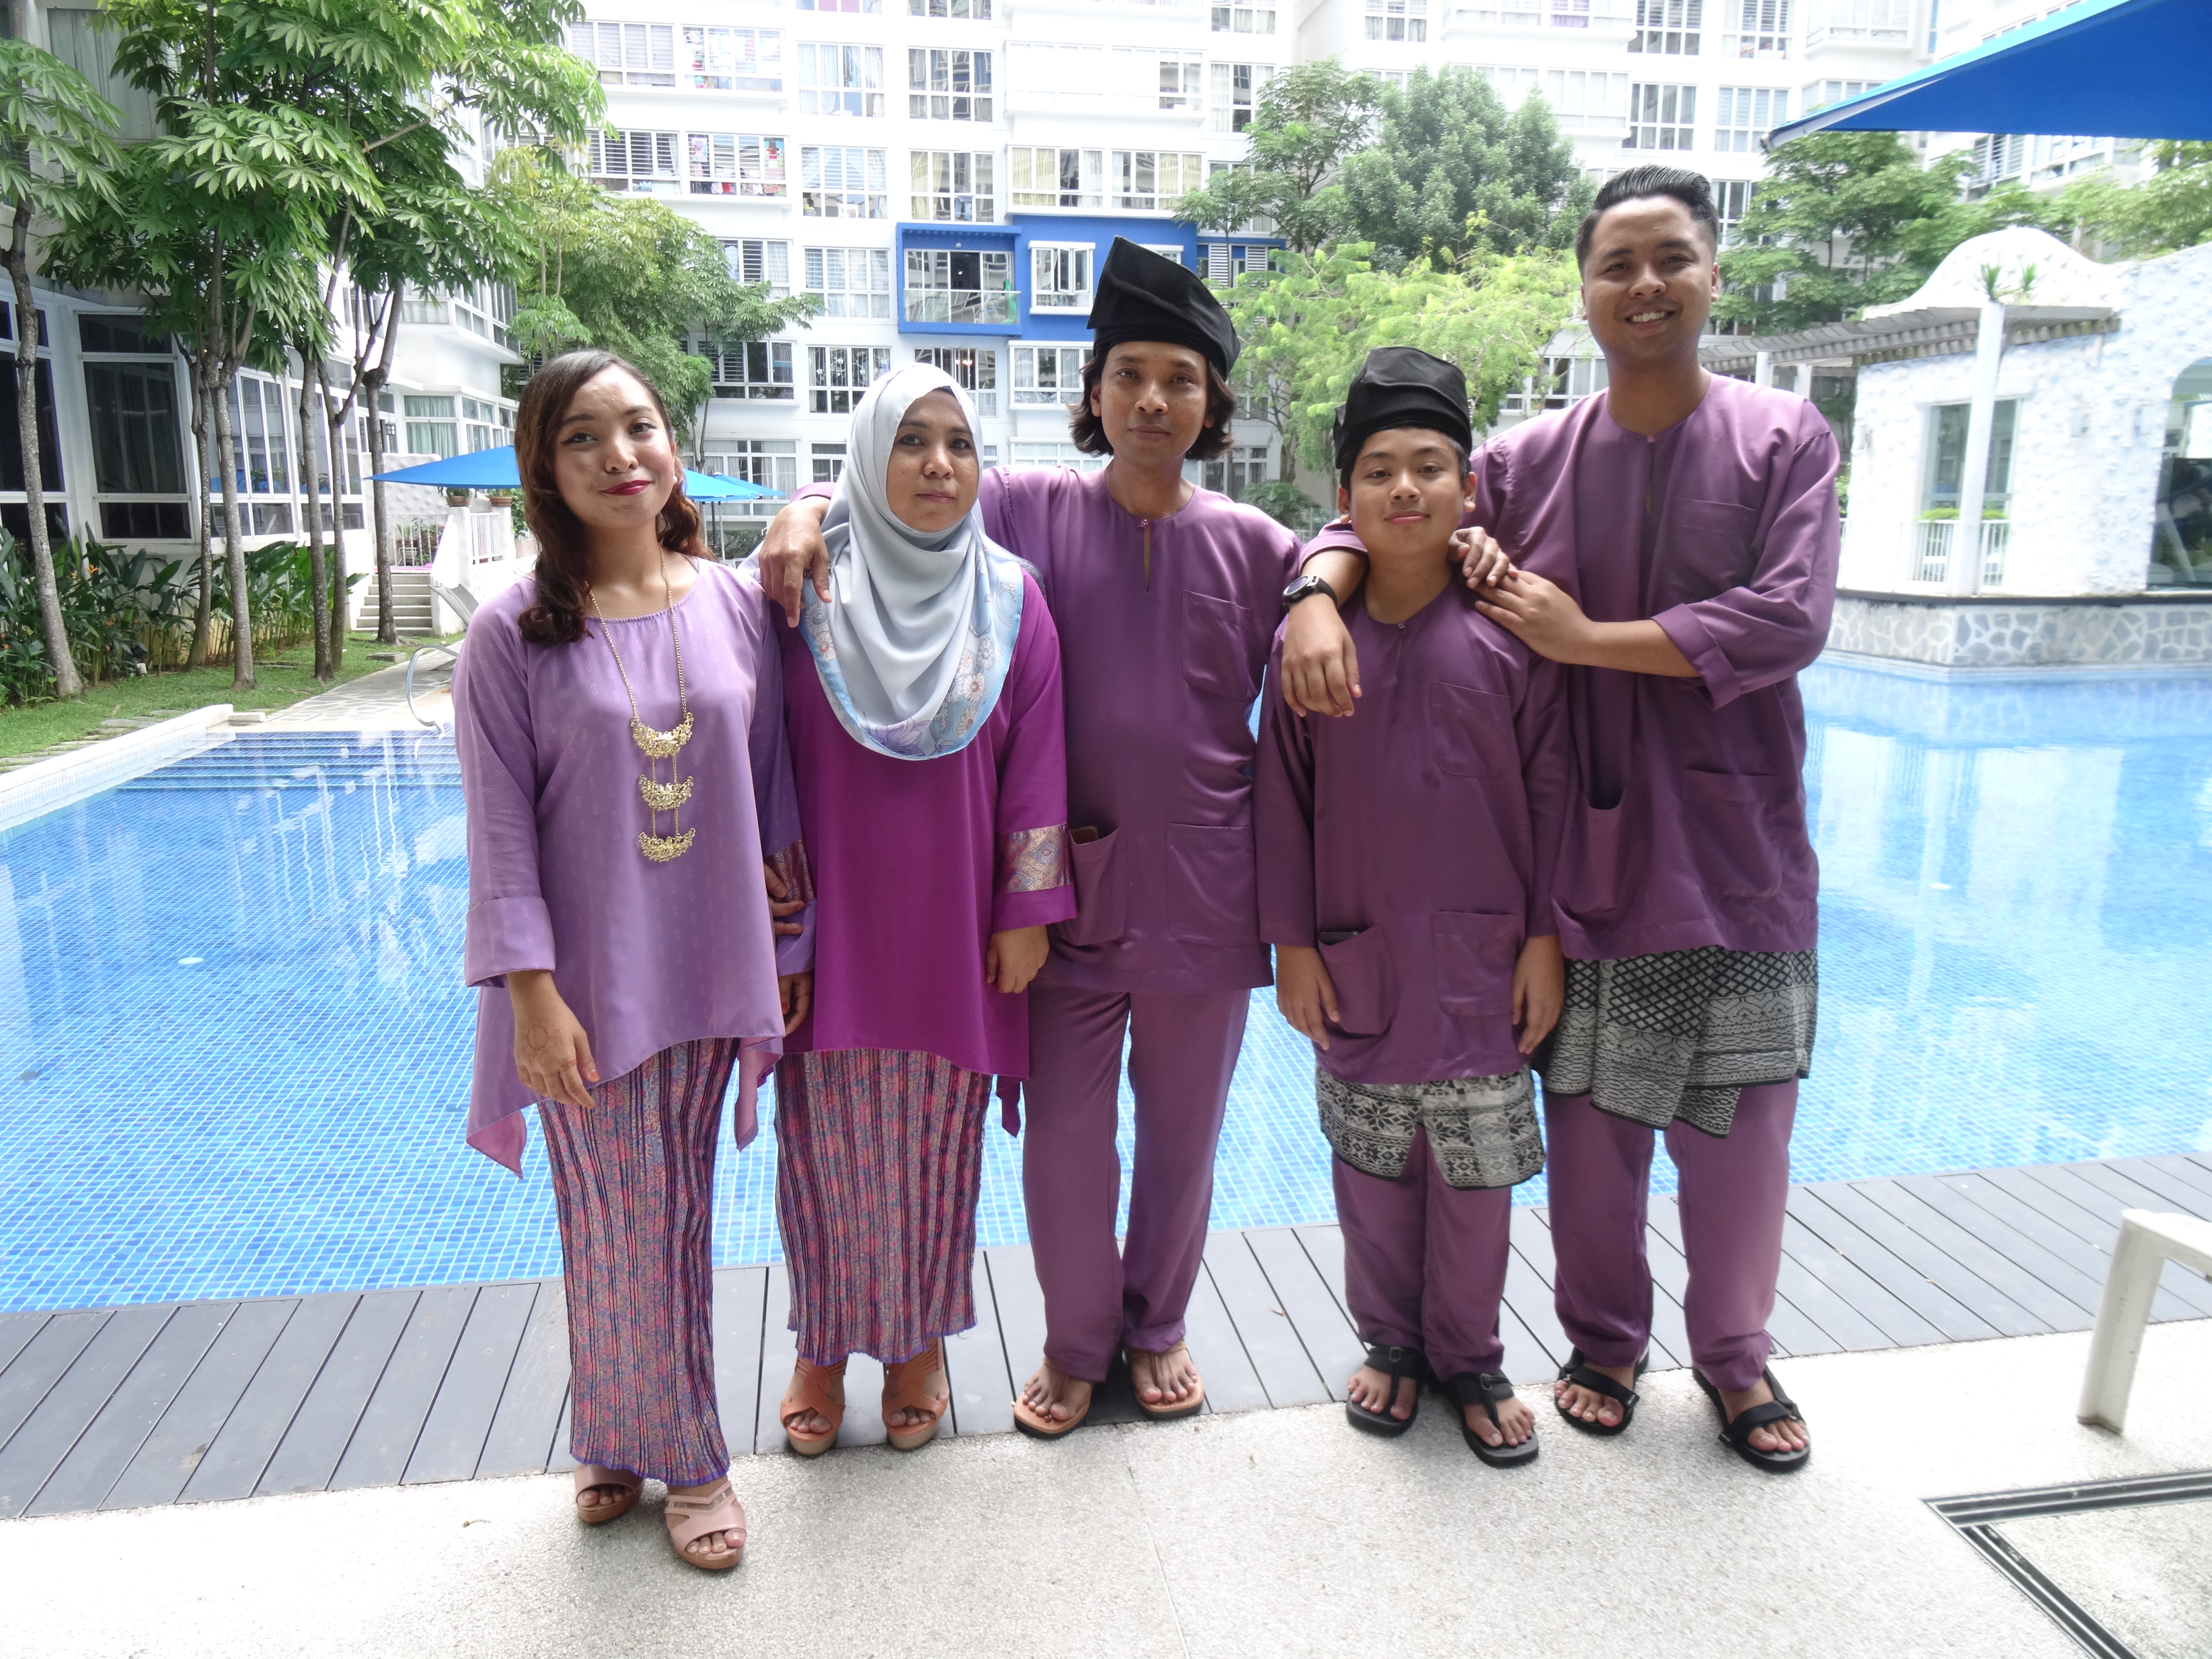 Mr Ismail bin Ali (in the middle) and his family dressed in coordinated outfits for Hari Raya Puasa.